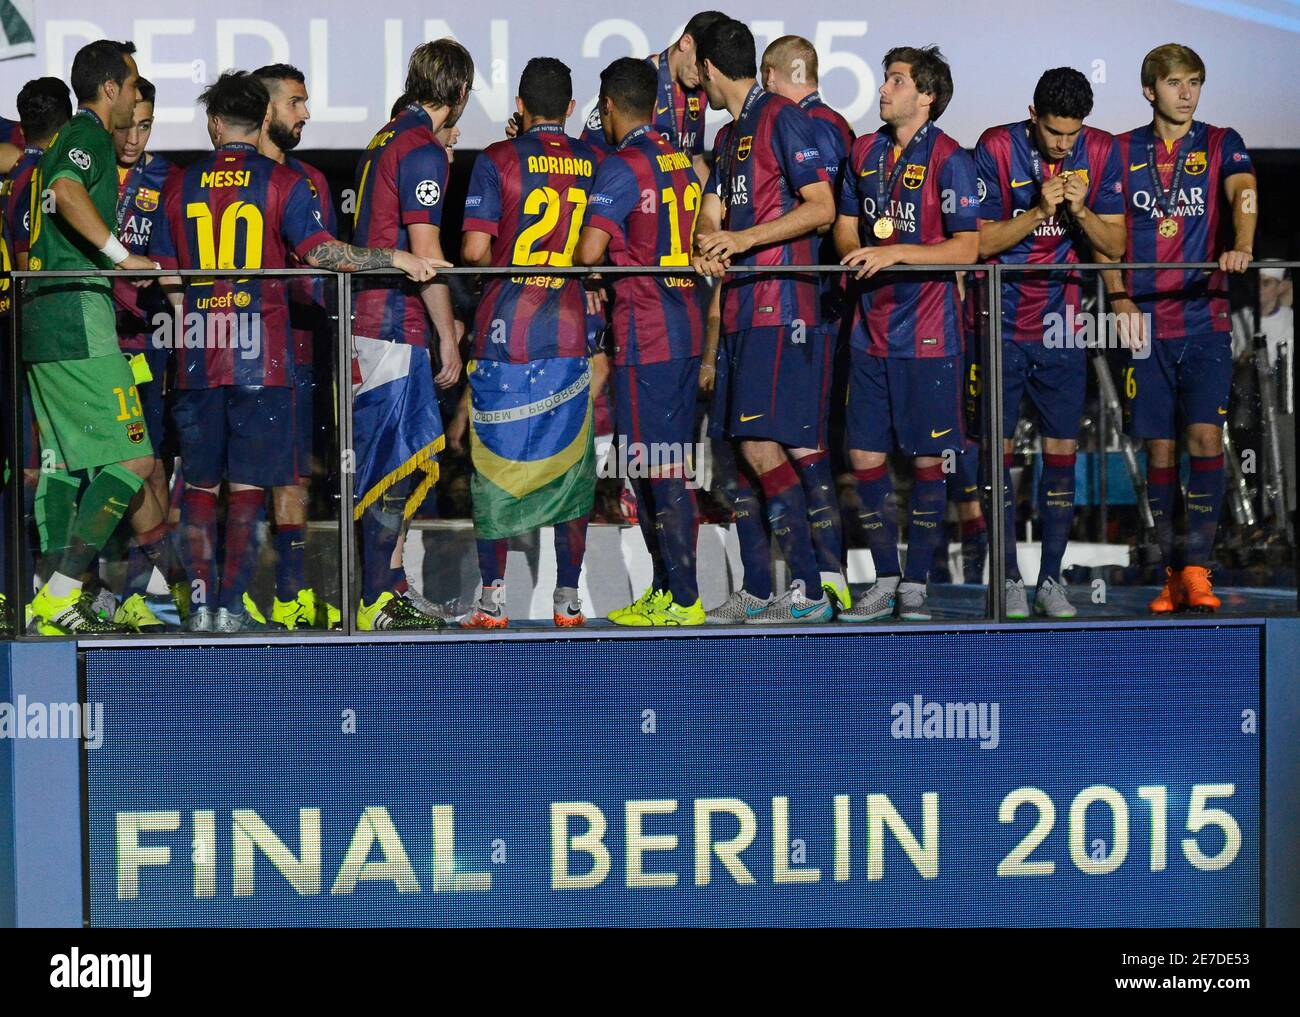 BERLIN, GERMANY - JUNE 6, 2015: Barceloan players pictured during the award ceremony held after the 2014/15 UEFA Champions League Final between Juventus Torino and FC Barcelona at Olympiastadion. Stock Photo